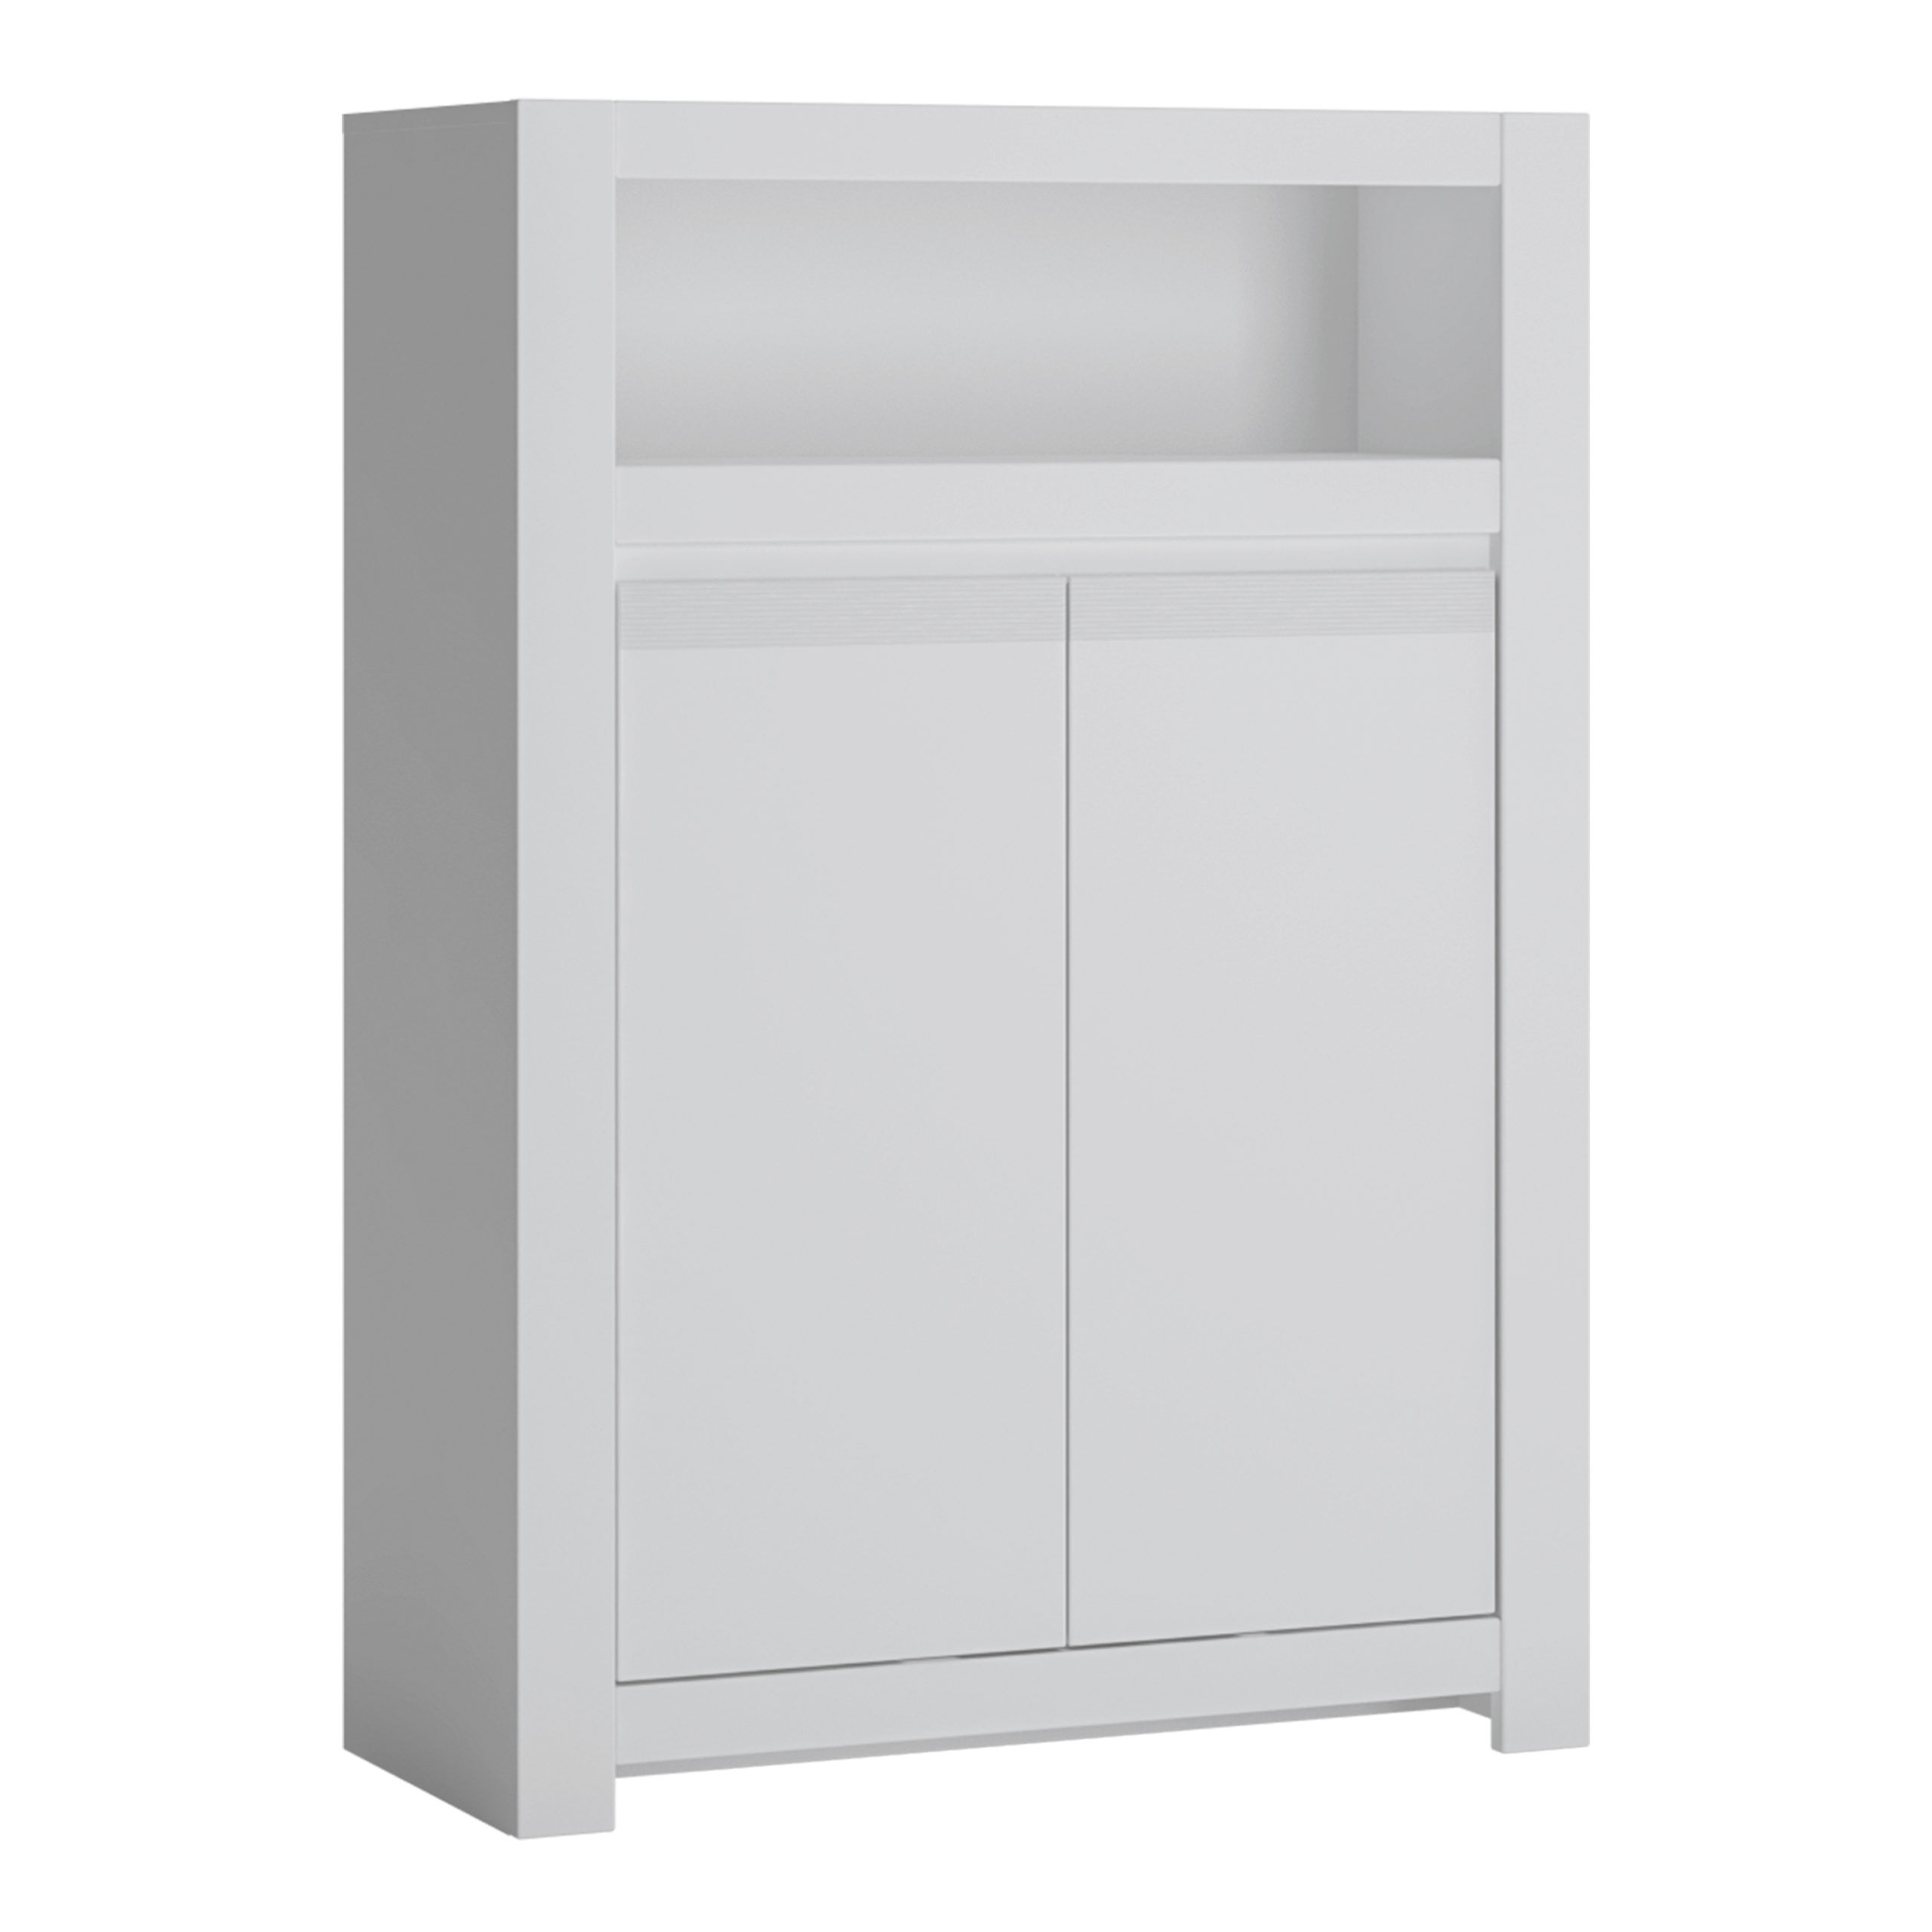 Anchorage White 2 Door Cabinet   Self Assembly